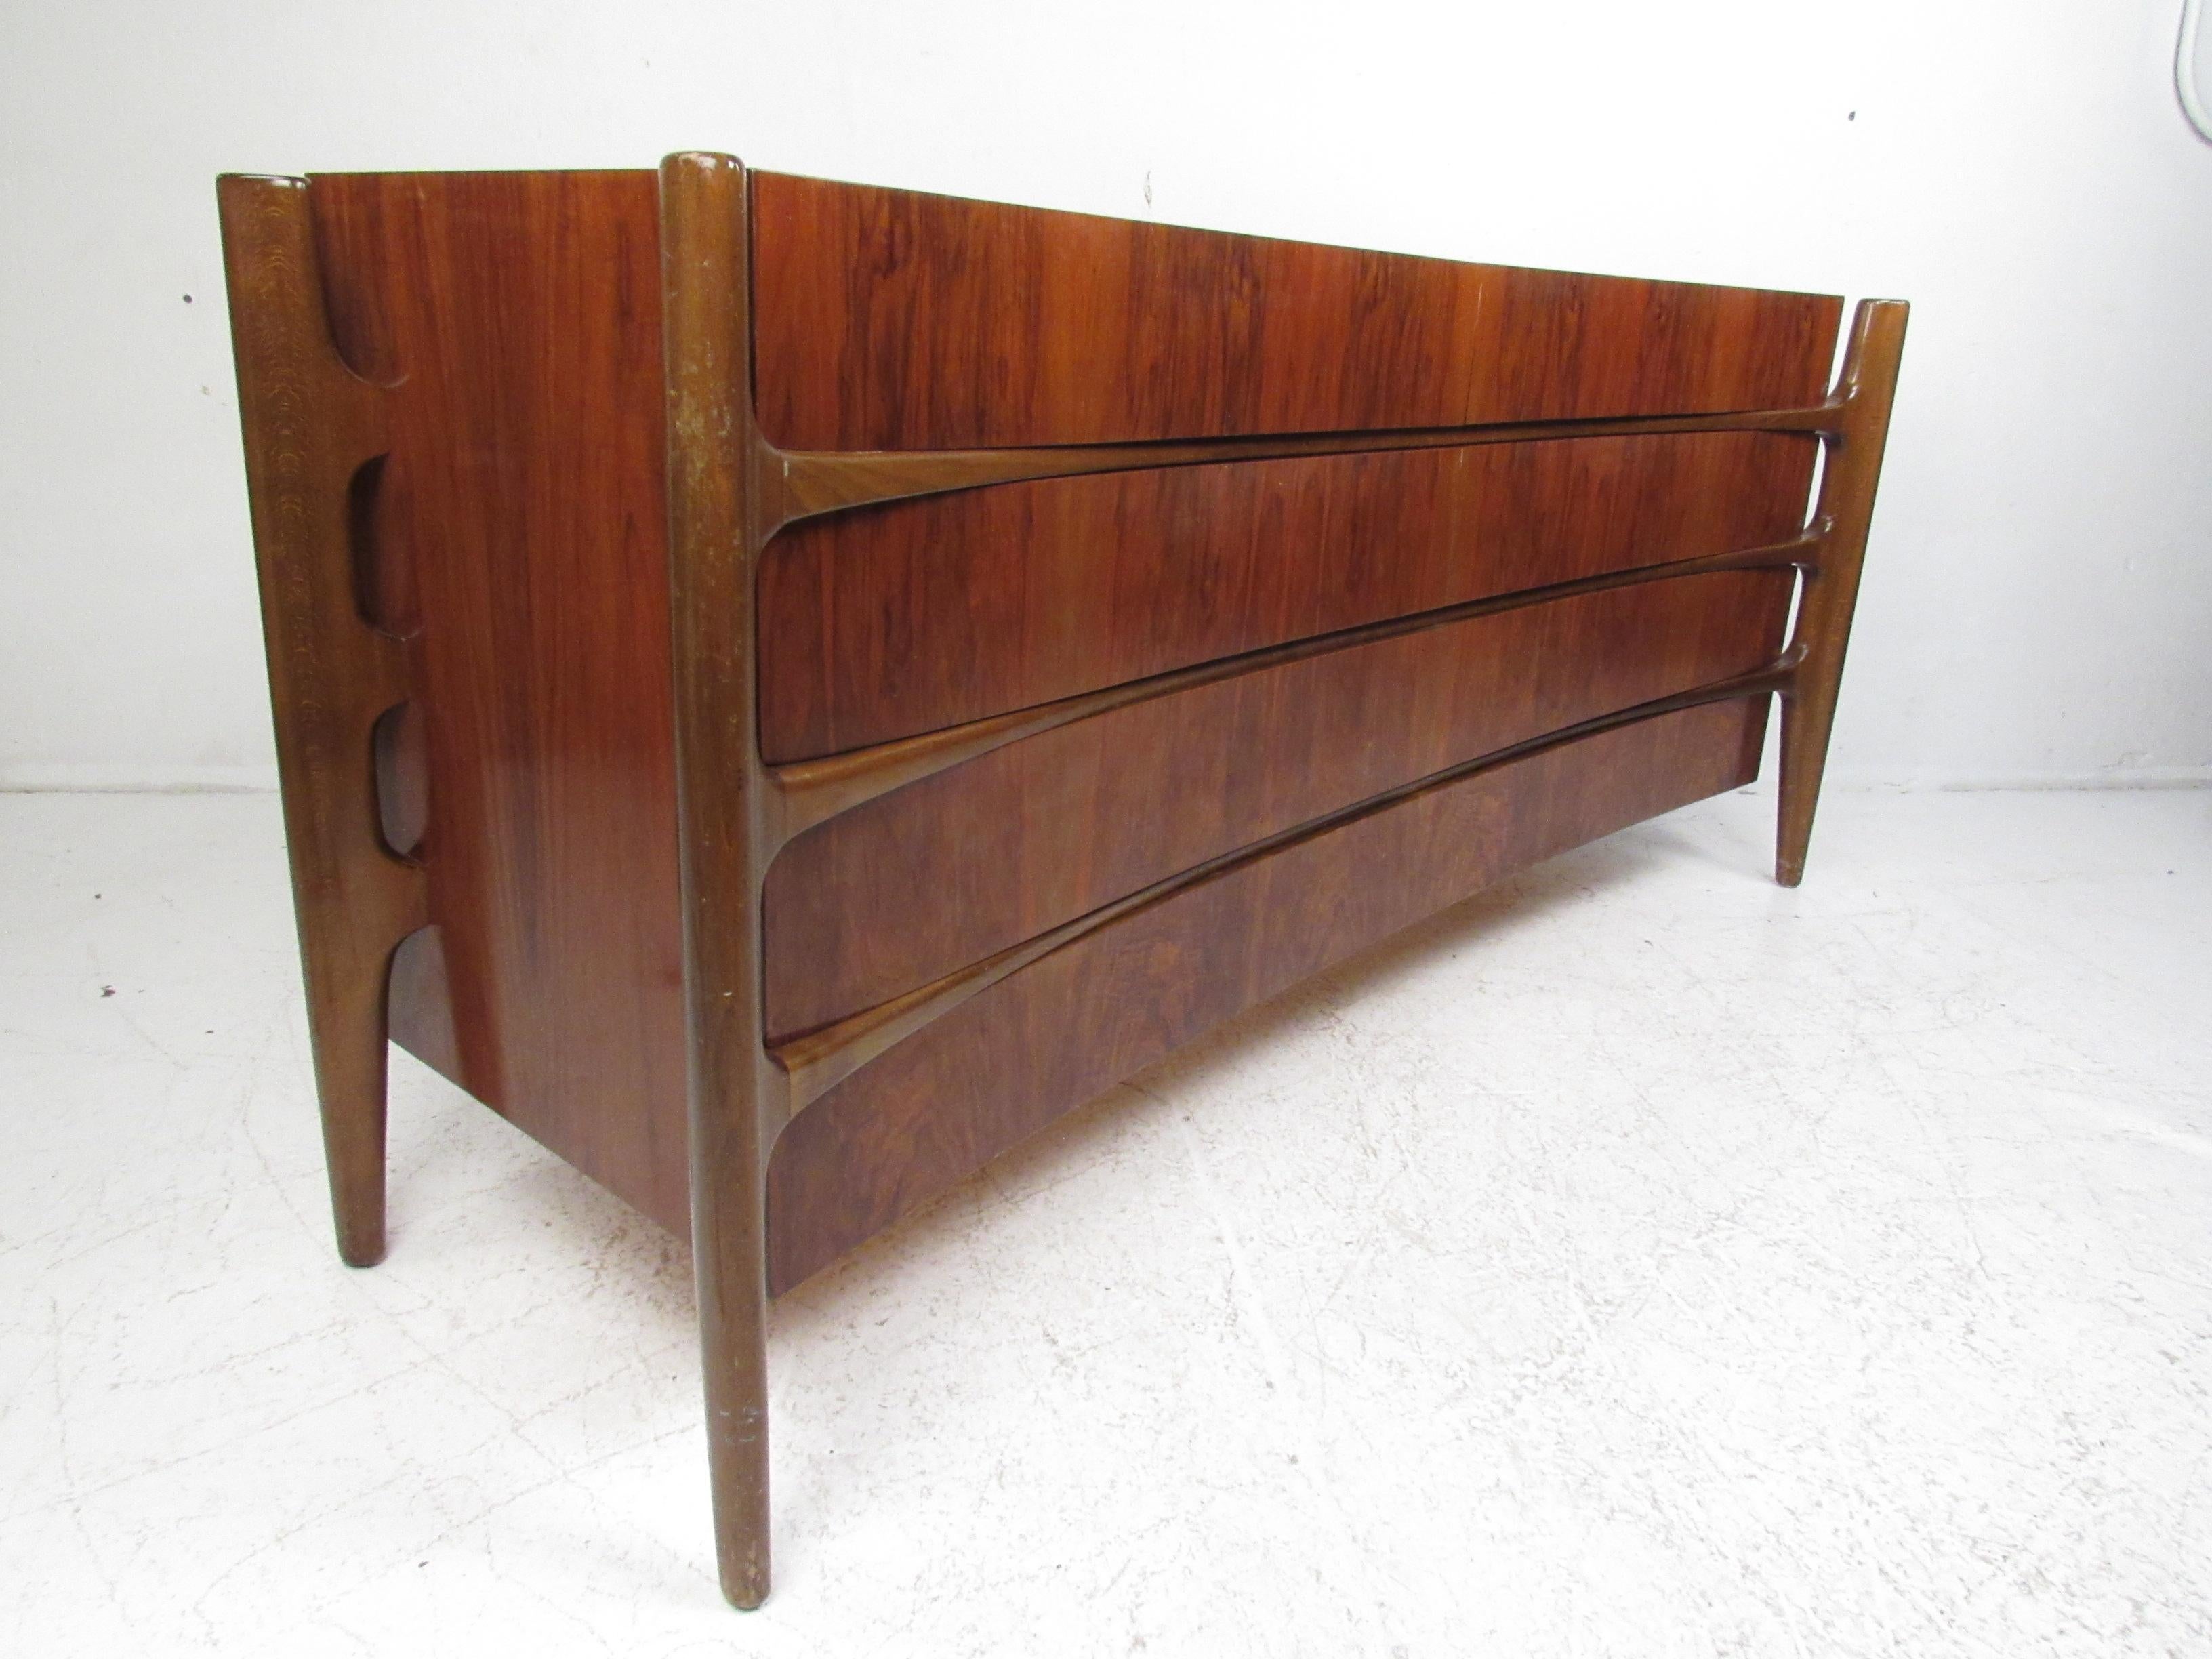 This impressive vintage modern dresser boasts a concave sculpted front design with edge mounted legs and an elegant walnut finish. A highly sought after, unique midcentury case piece that is sure to leave a lasting impression in any setting. The